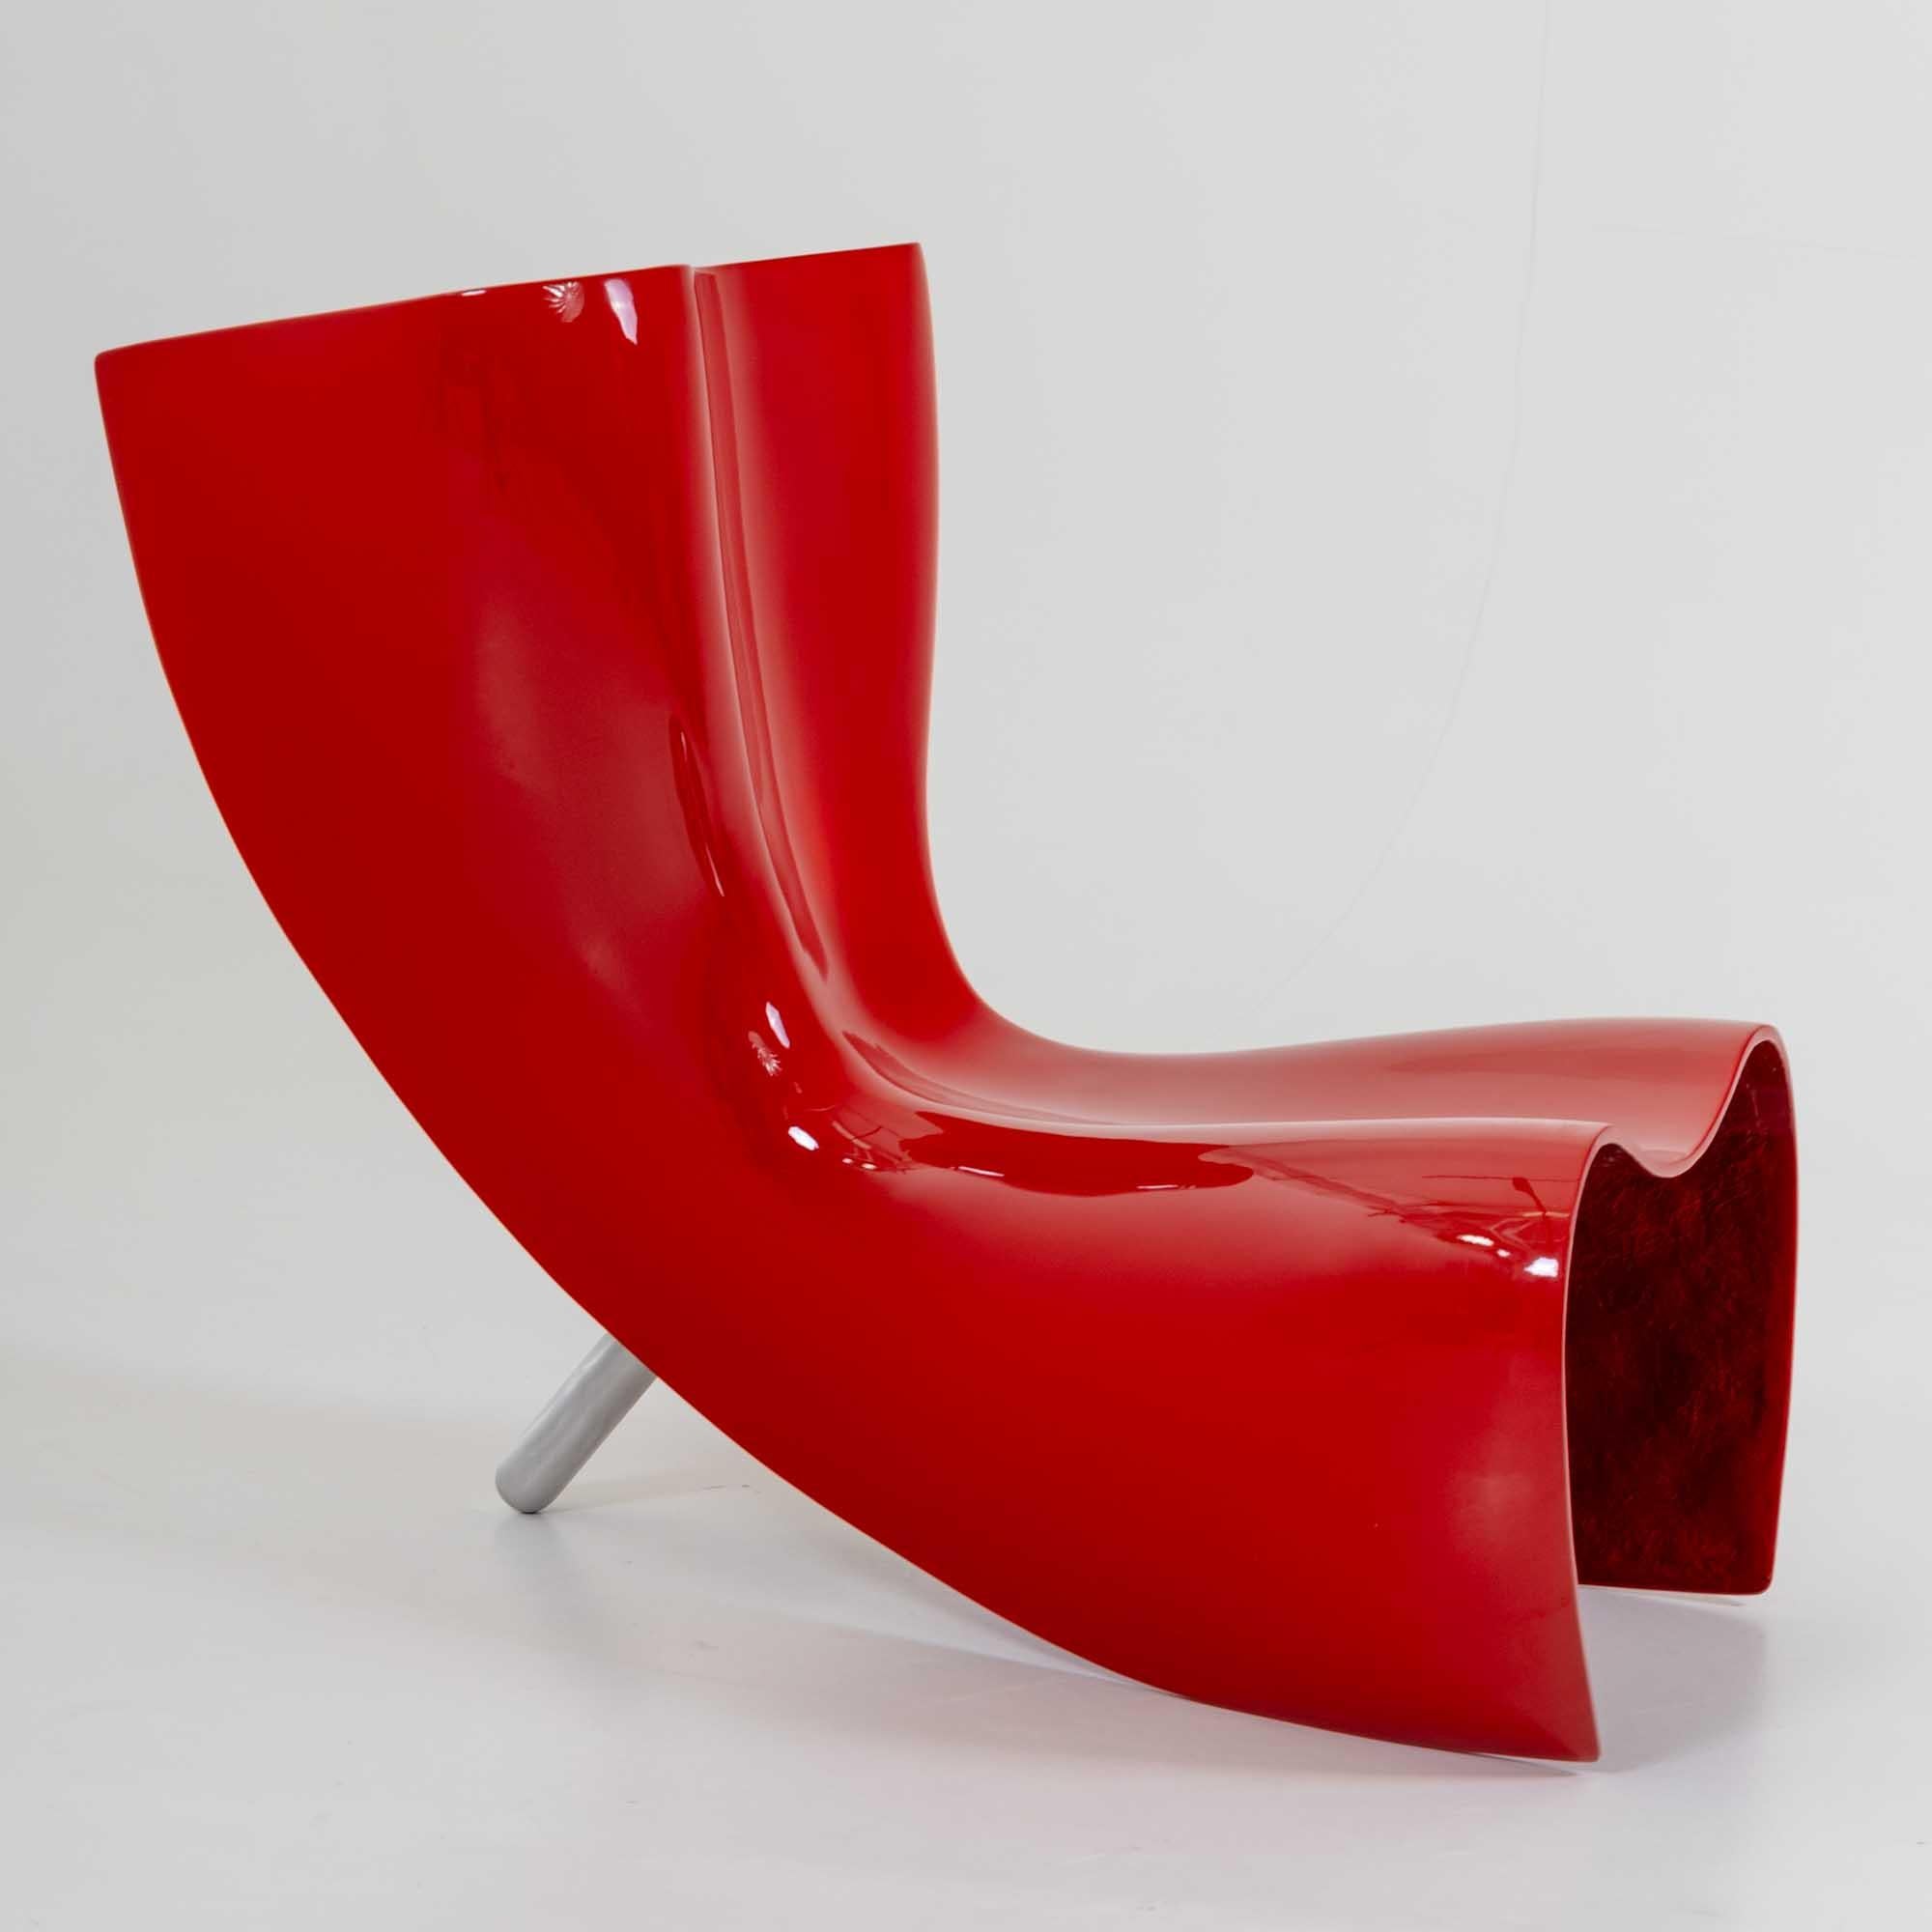 Red lacquered ‘Felt’ chair designed by Marc Newson (Sydney, *1963) in 1993 for the Italian manufacturer Cappellini. The chair features a reinforced fiberglass shell and an aluminum support, showcasing a perfect blend of innovative design and